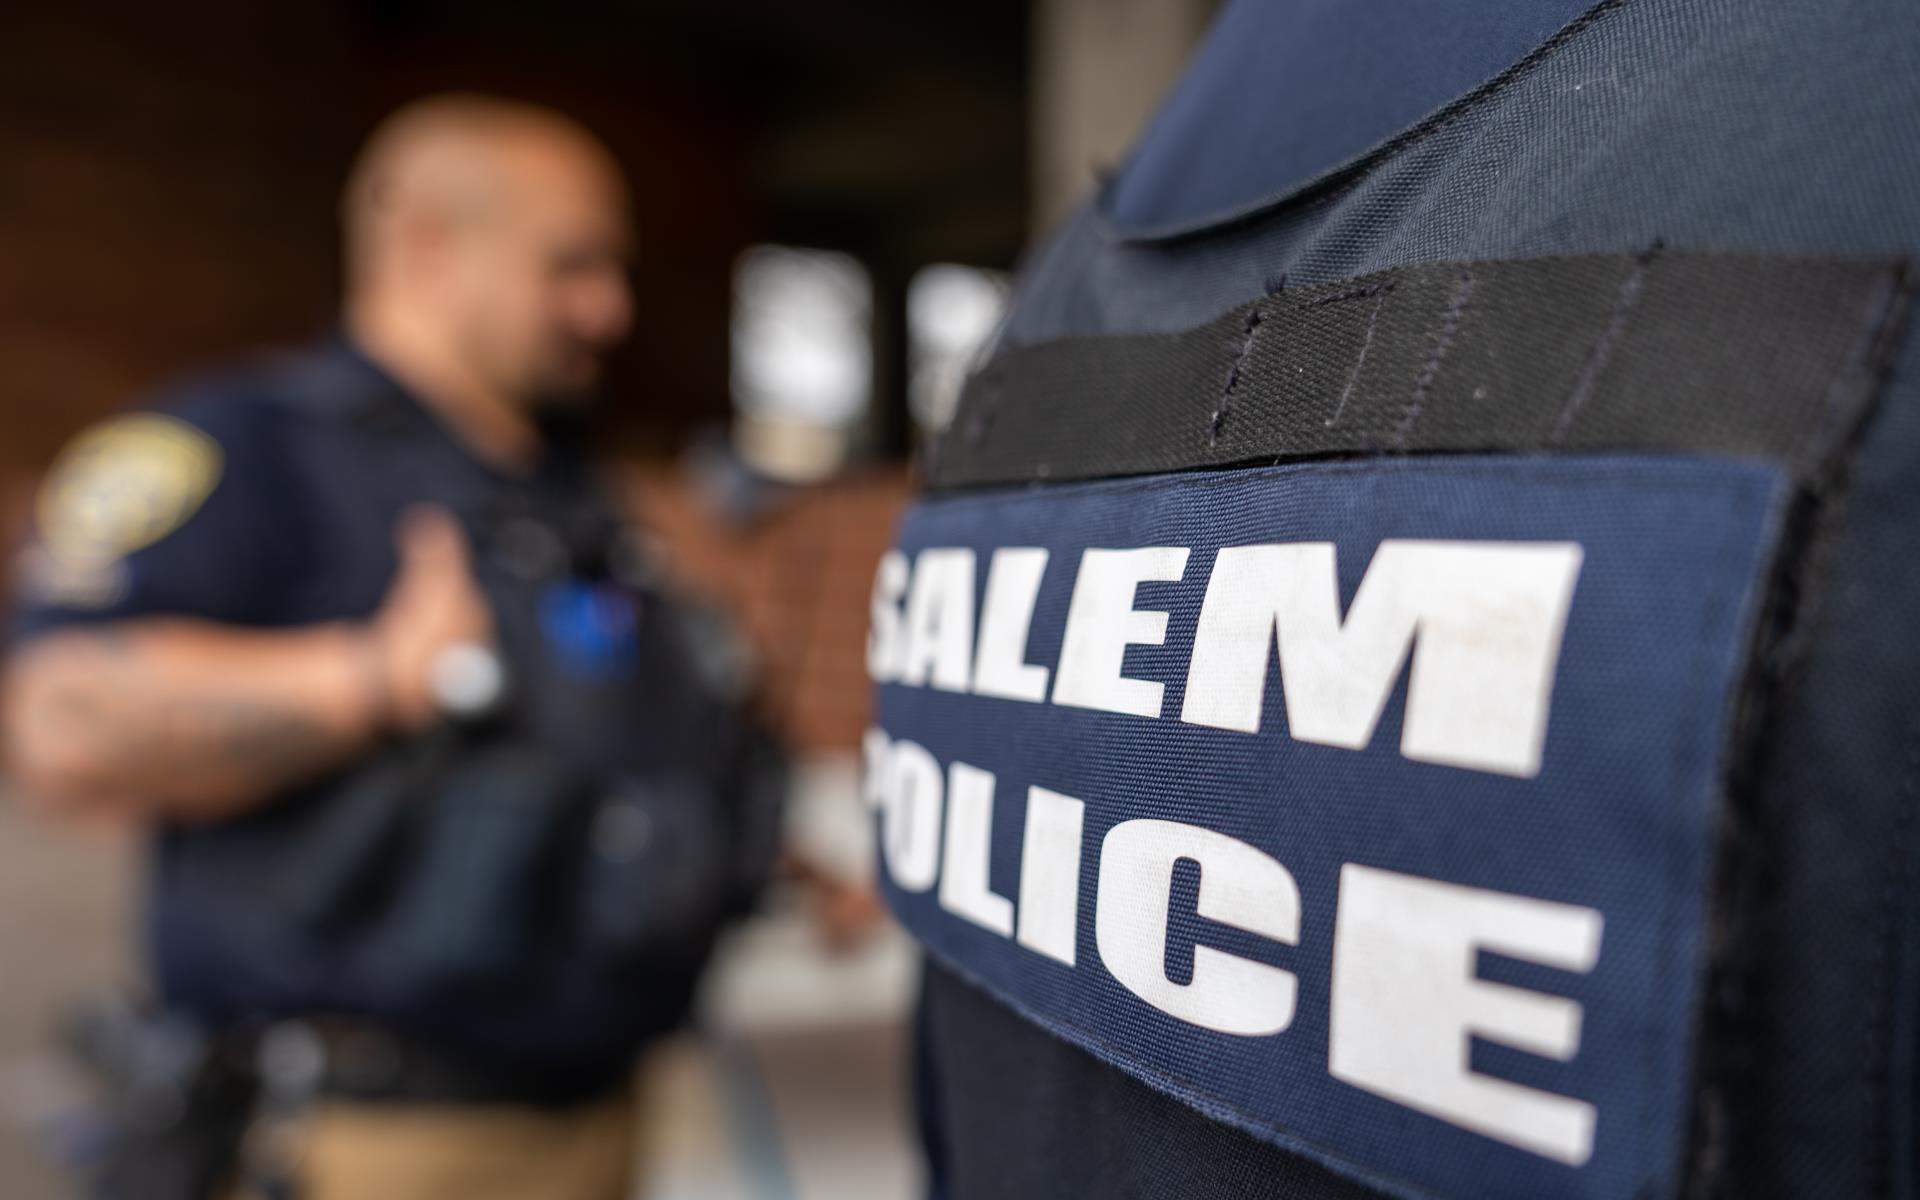 Two officers with a Salem Police badge